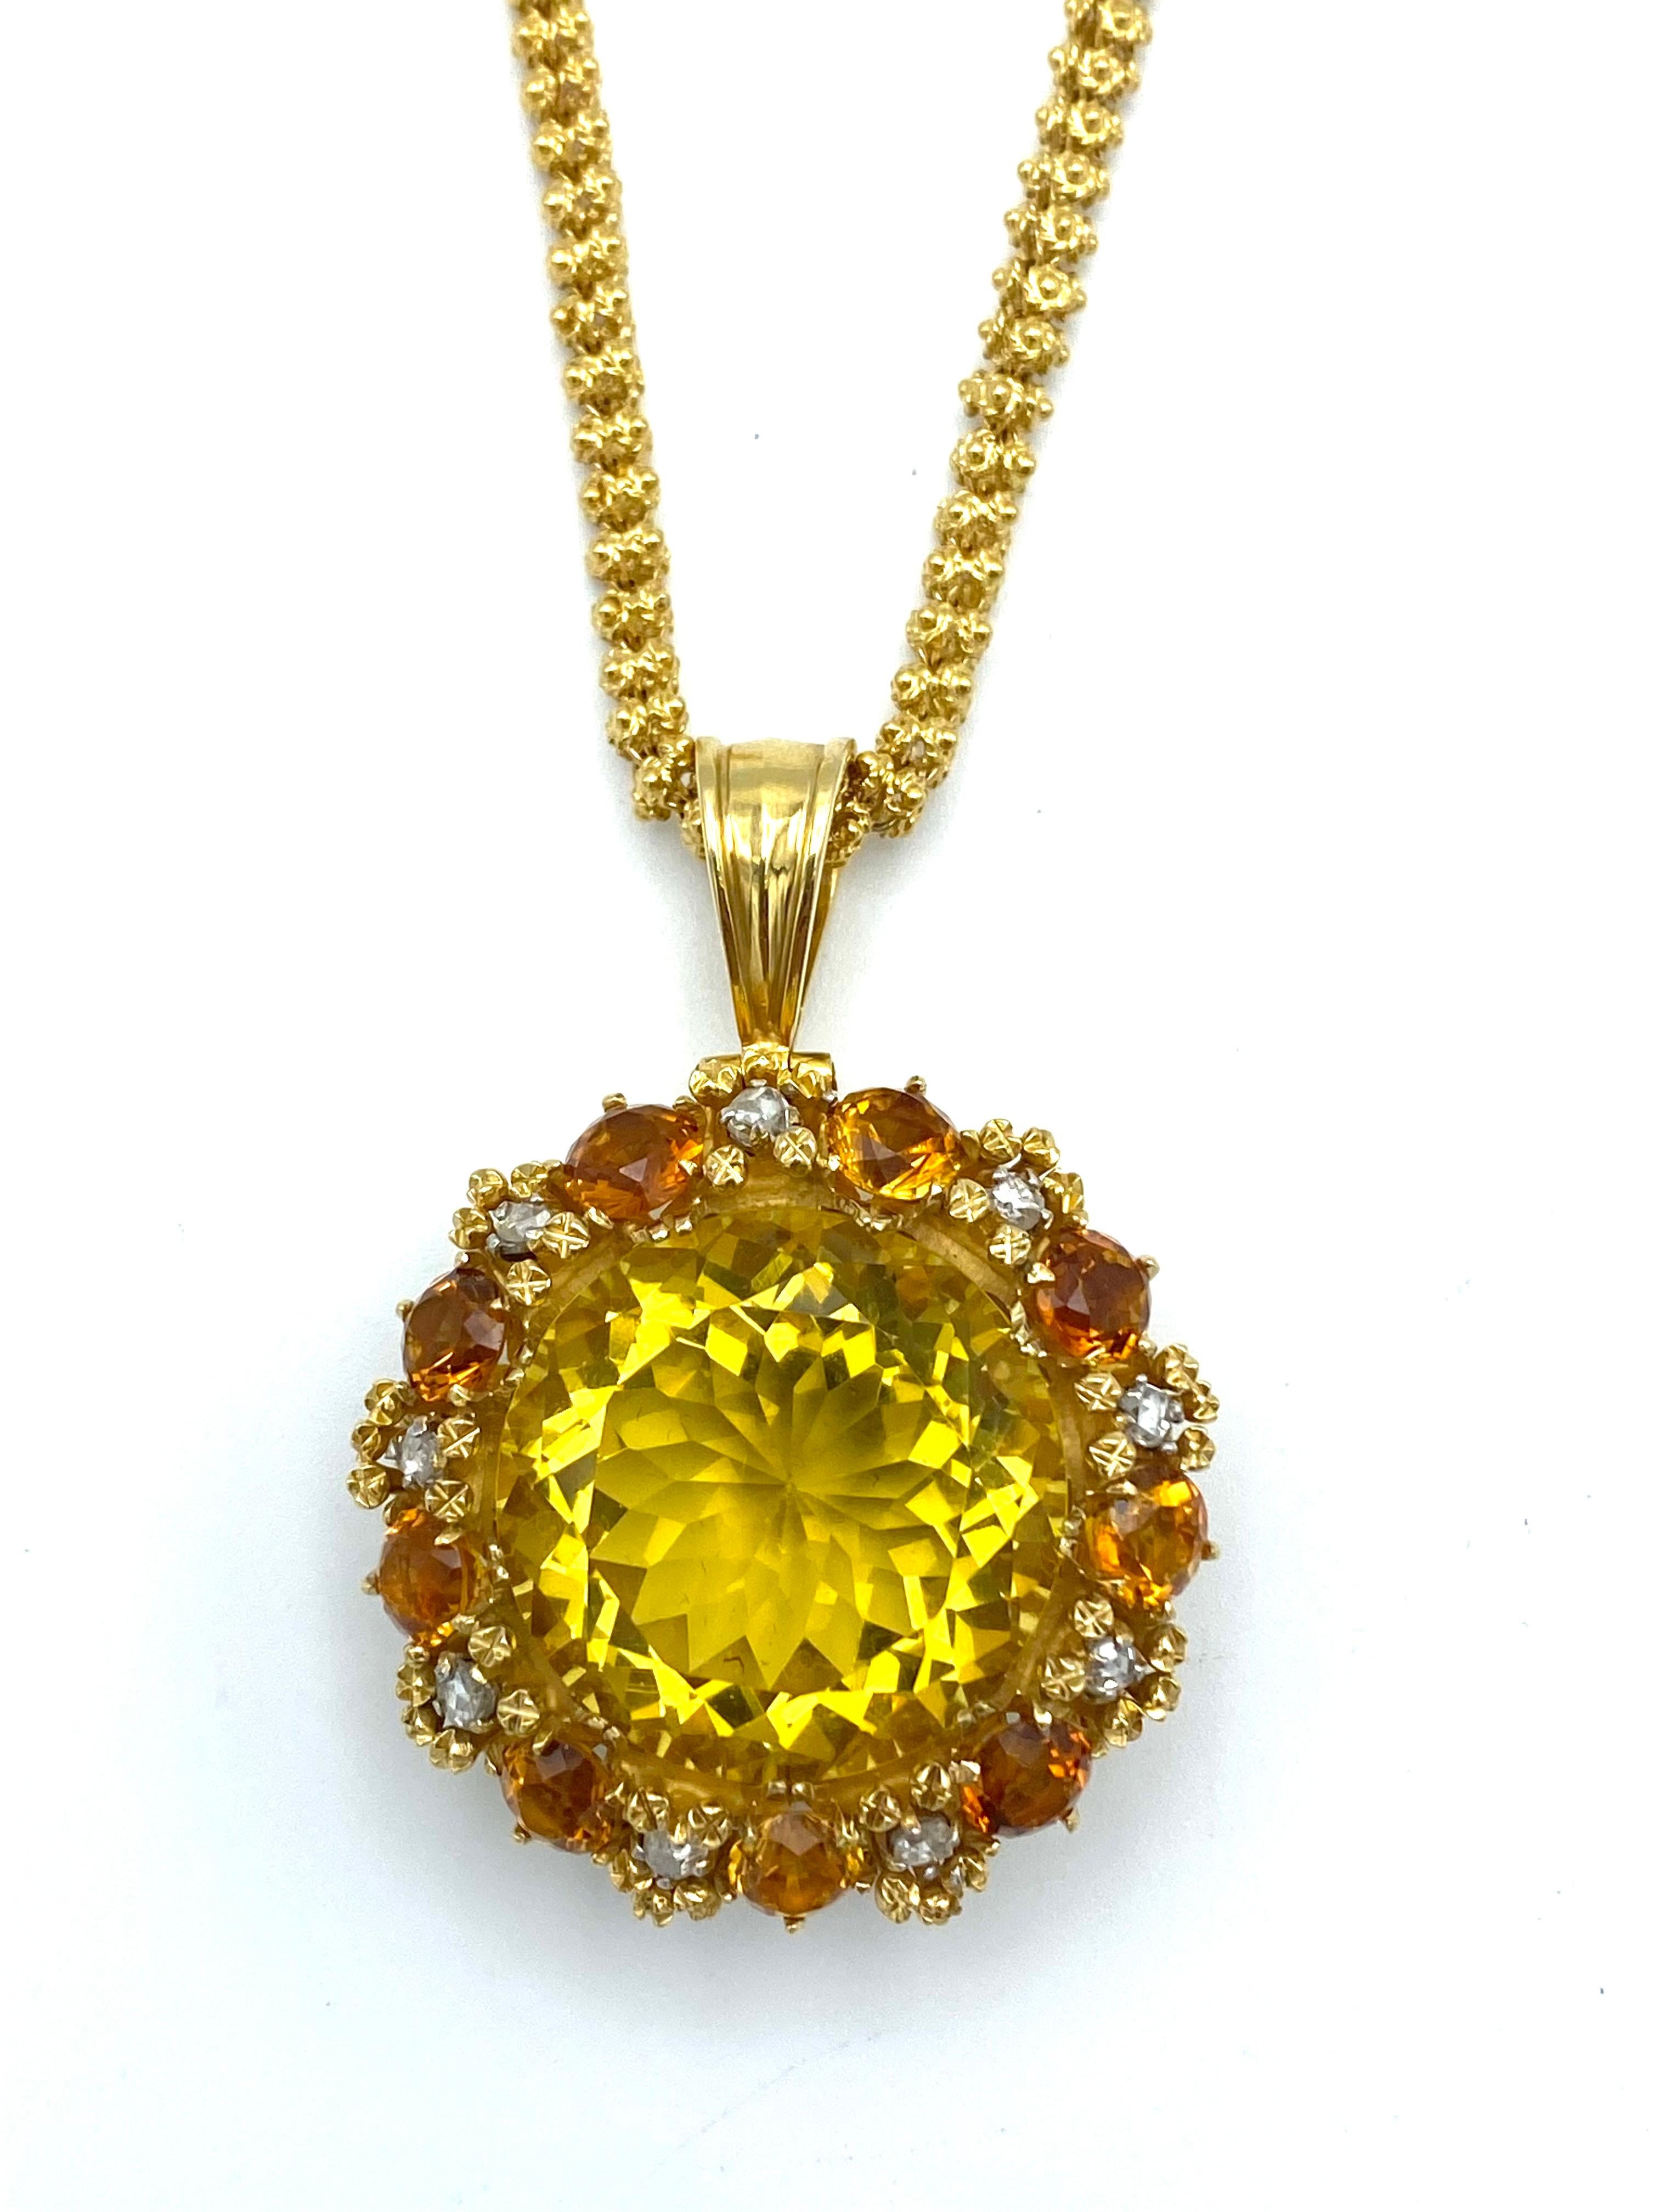 Product details:

The chain is made out of 20 karat yellow gold, featuring floral motif. The pendant is made out of 18 karat yellow gold, citrine and rose cut diamonds.

The necklace is 30- 1/2